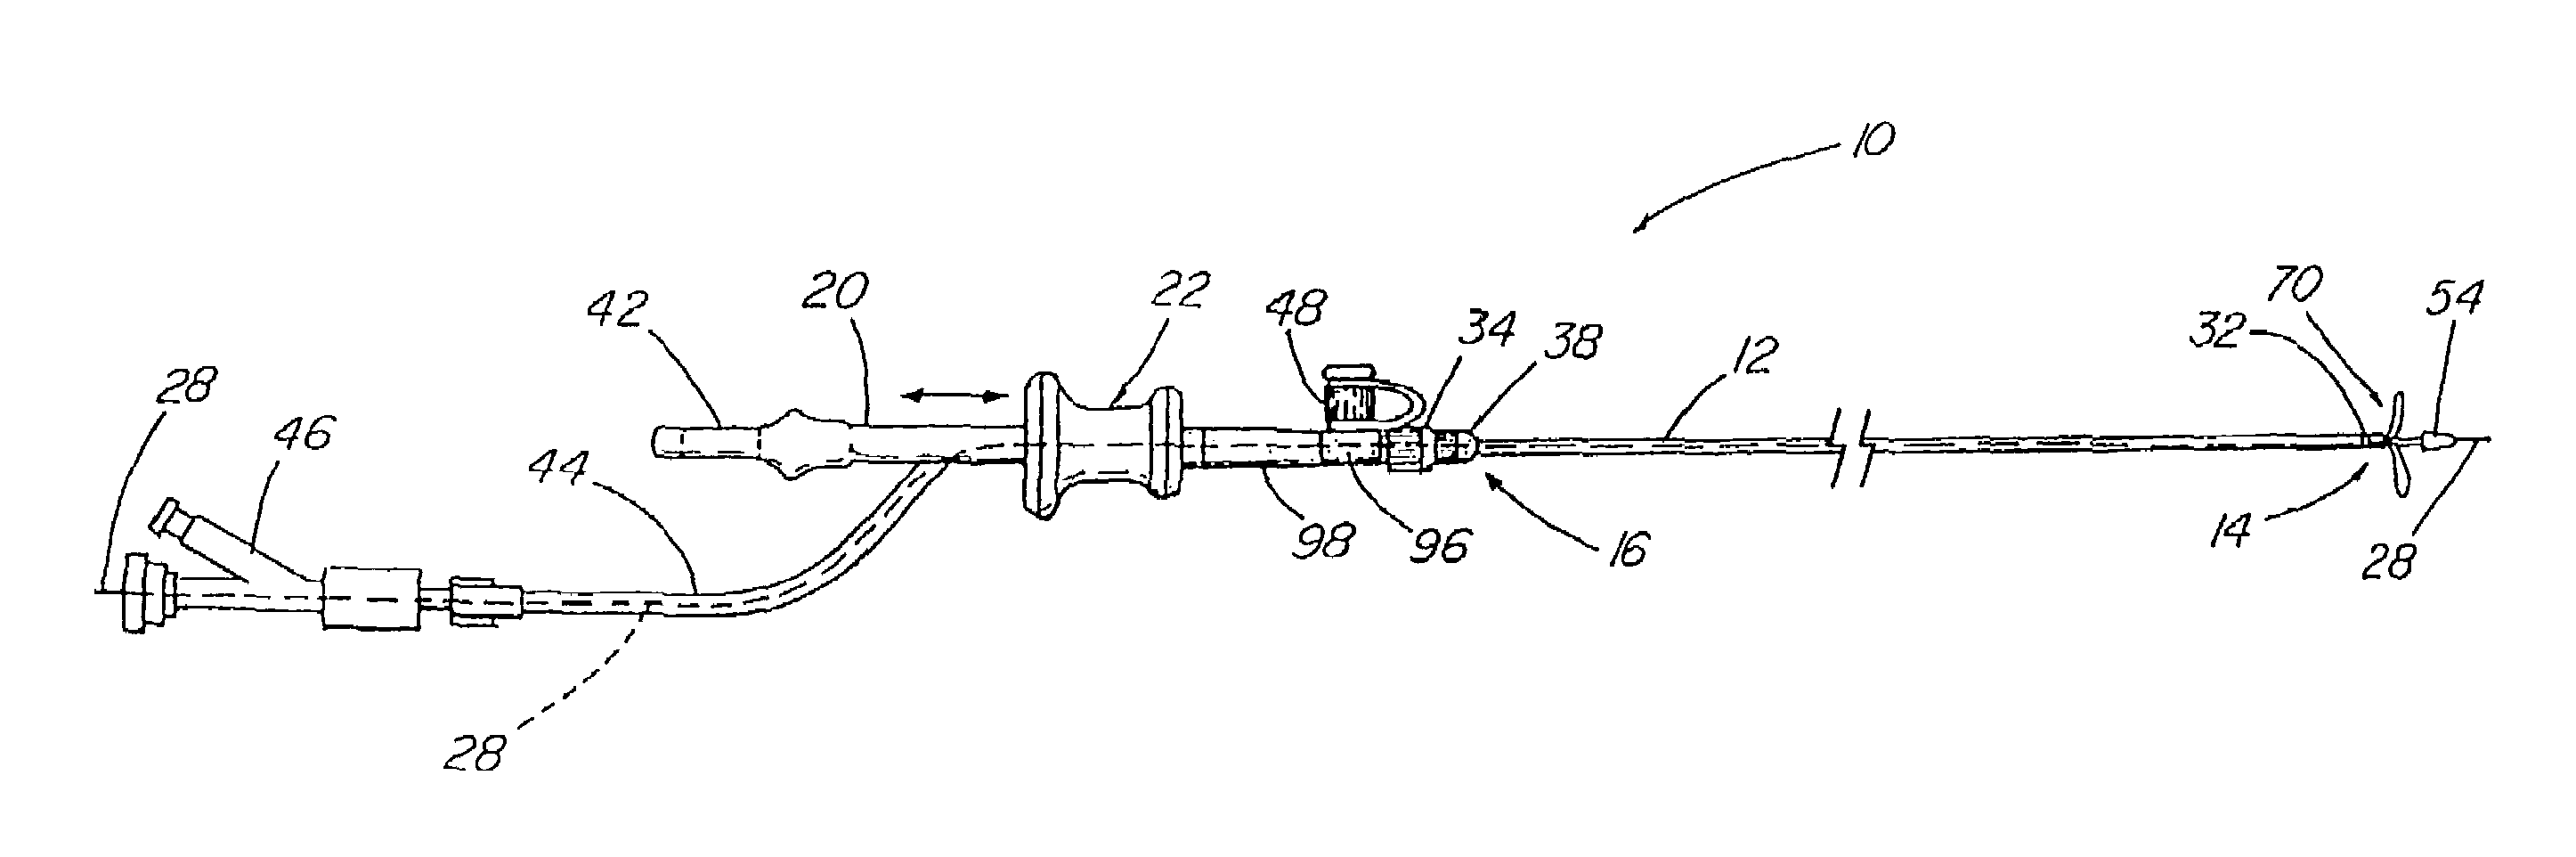 Medical grasping device